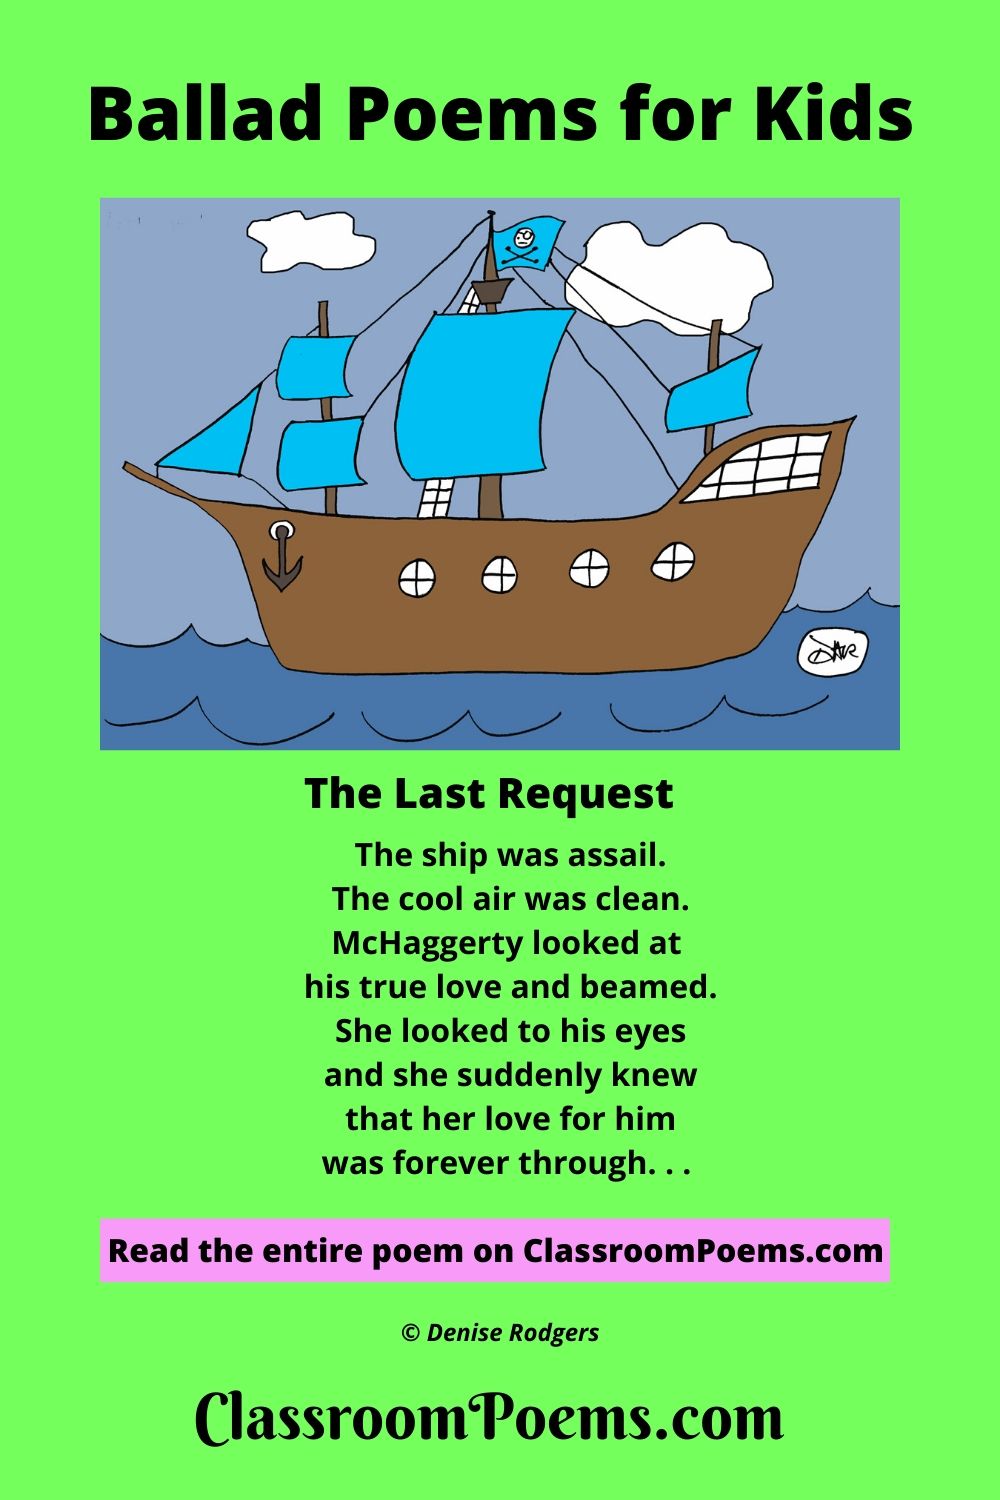 Pirate ship drawing. Ballad poems for kids.